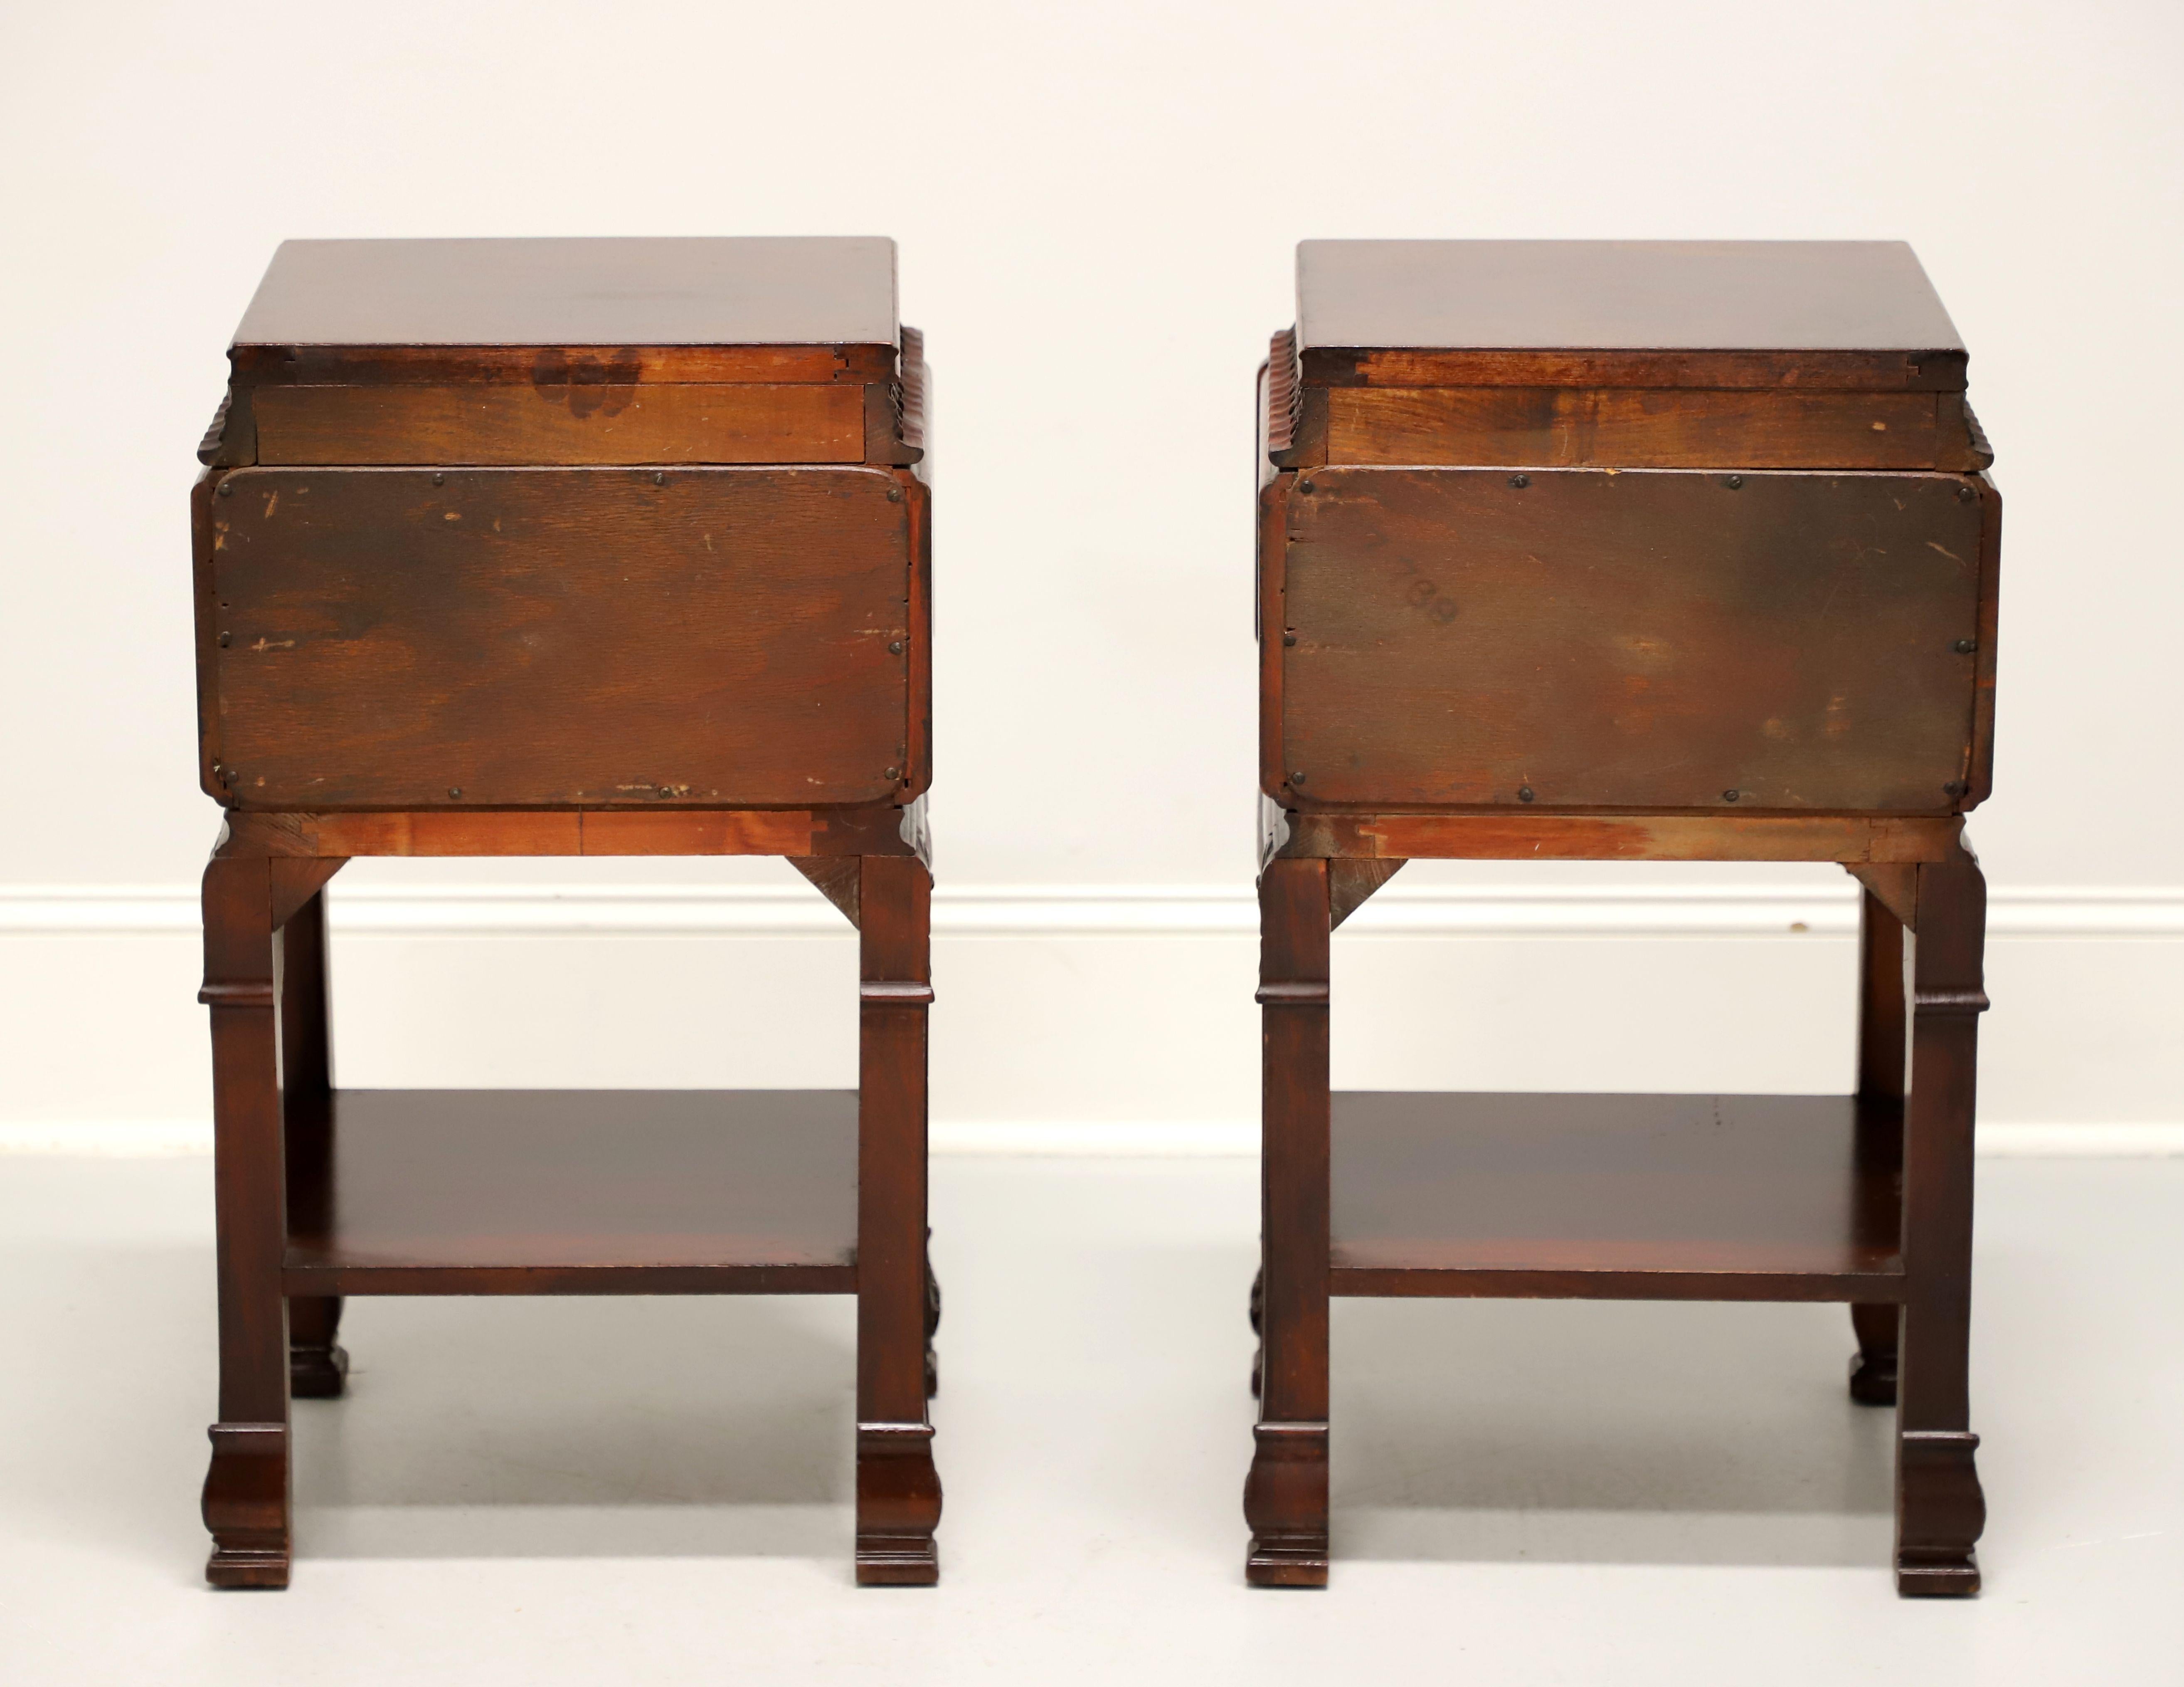 Chinoiserie Mid 20th Century Mahogany Asian Influenced Nightstands - Pair For Sale